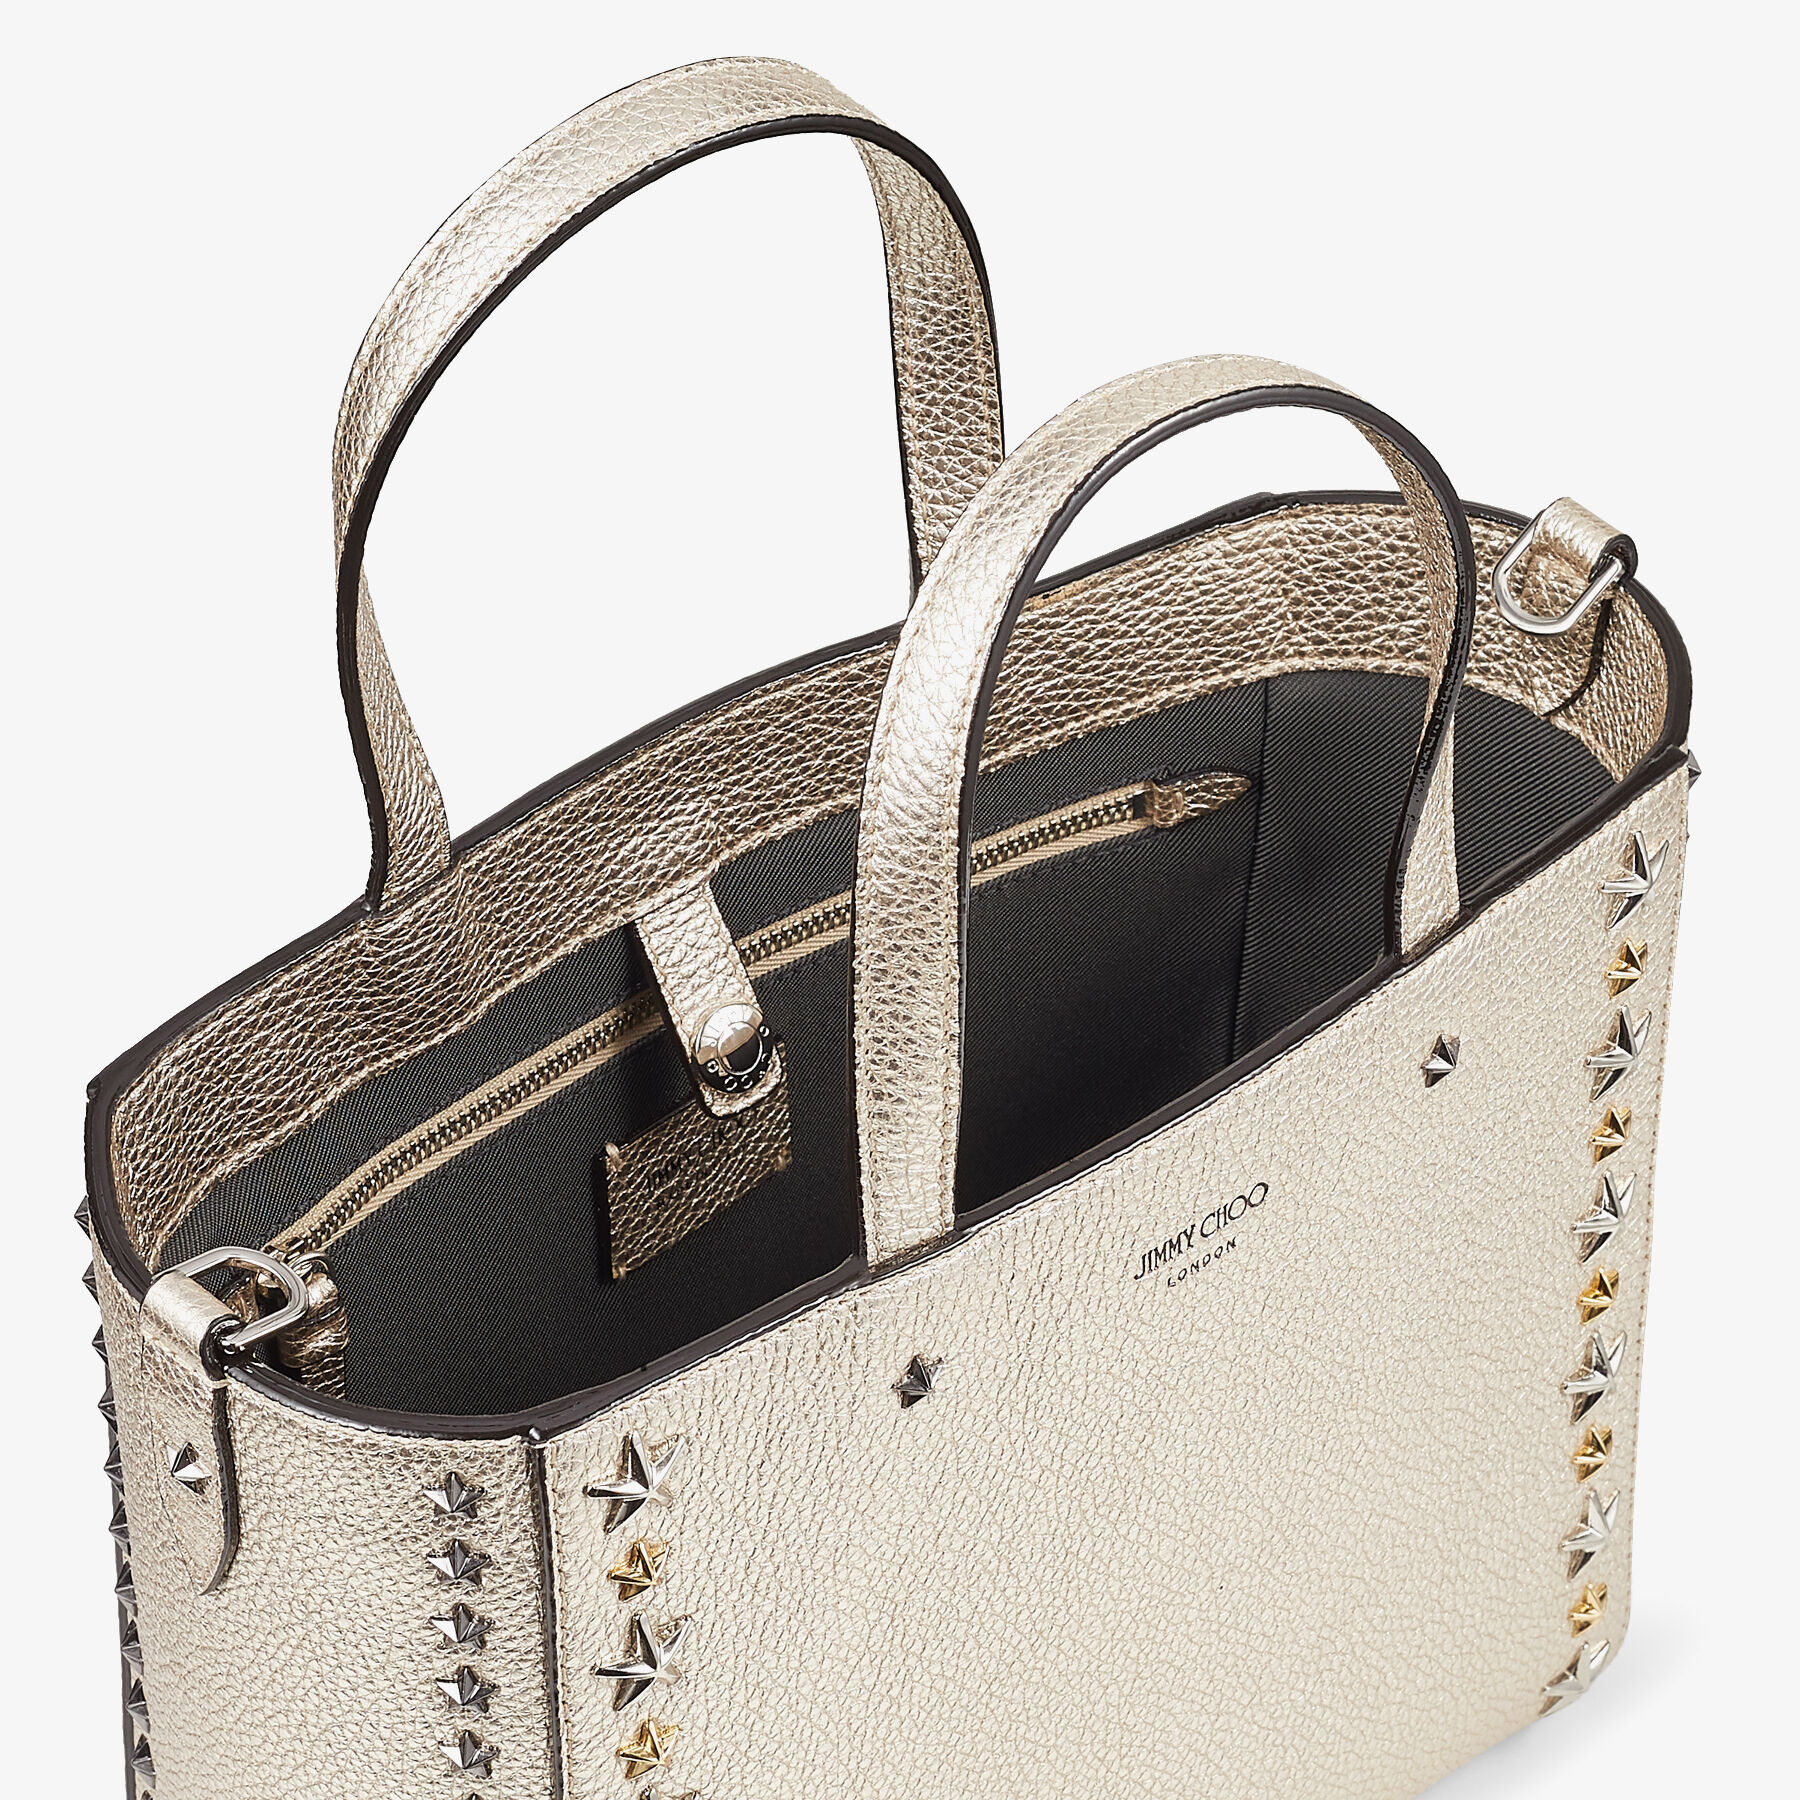 Light Gold Metallic Soft Grainy Calf Small Tote Bag with Stars Mix